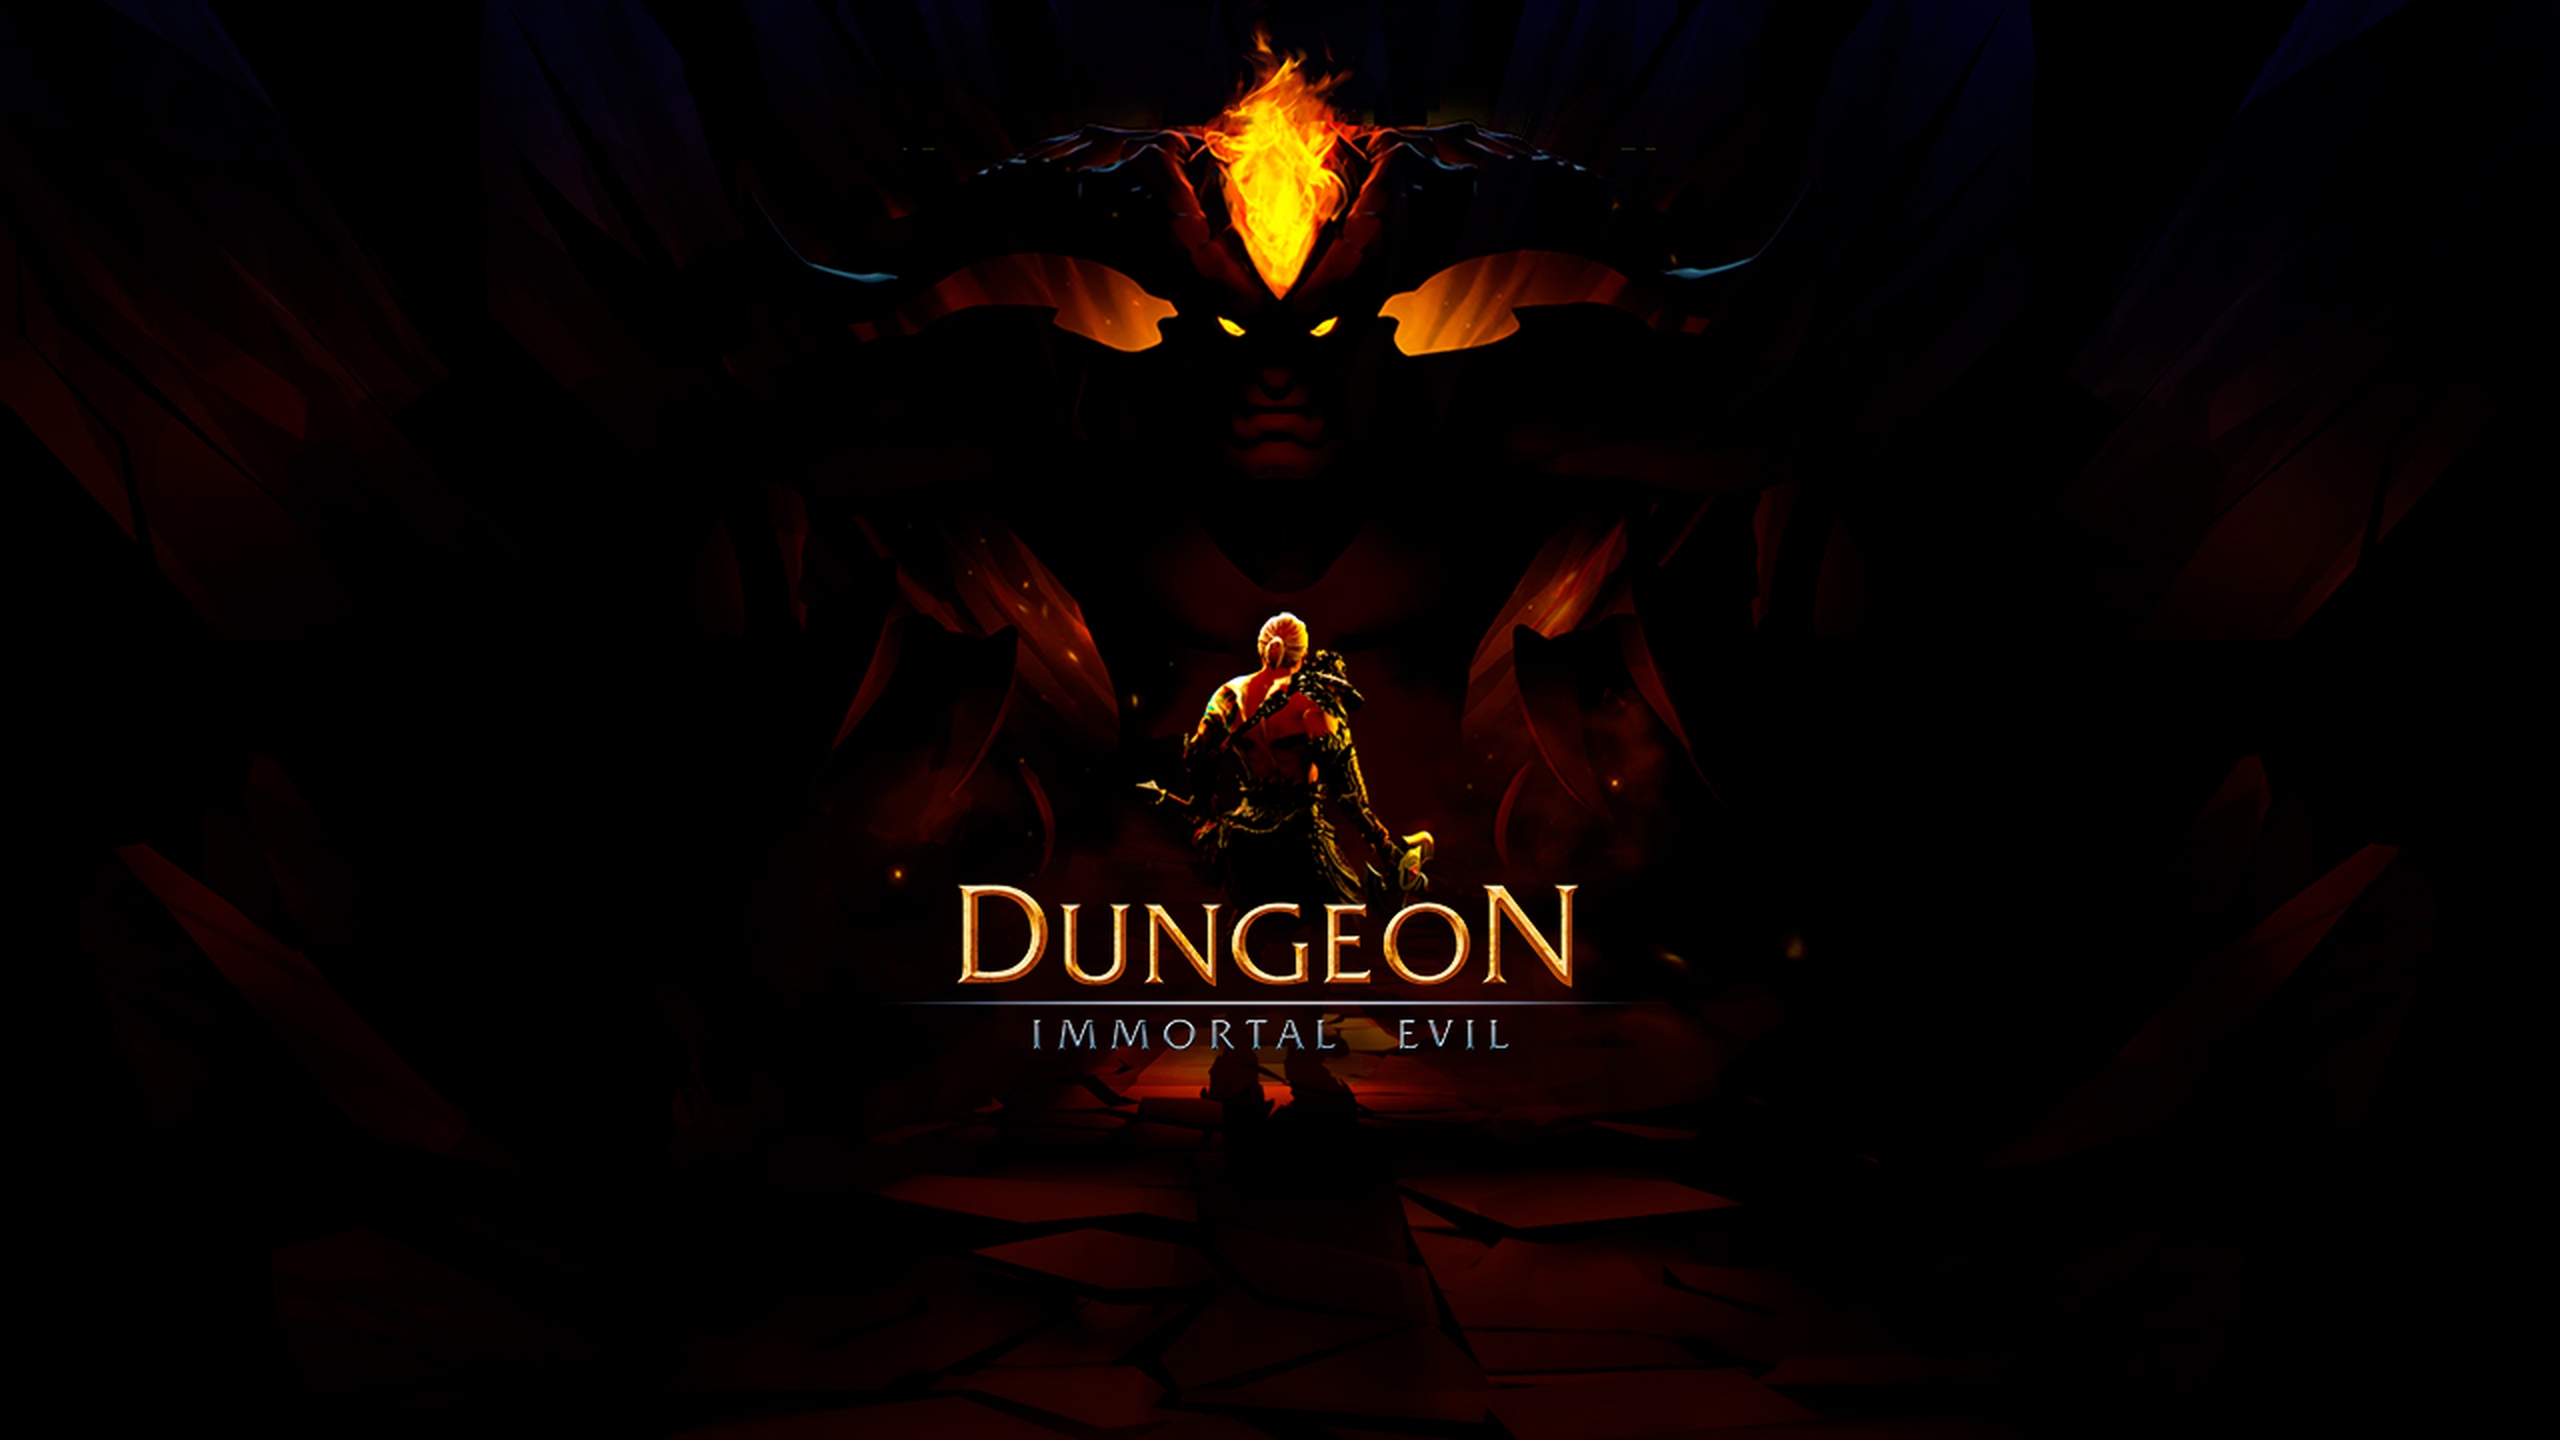 The Dungeon Immortal Evil Online Slot Demo Game by Evoplay Entertainment